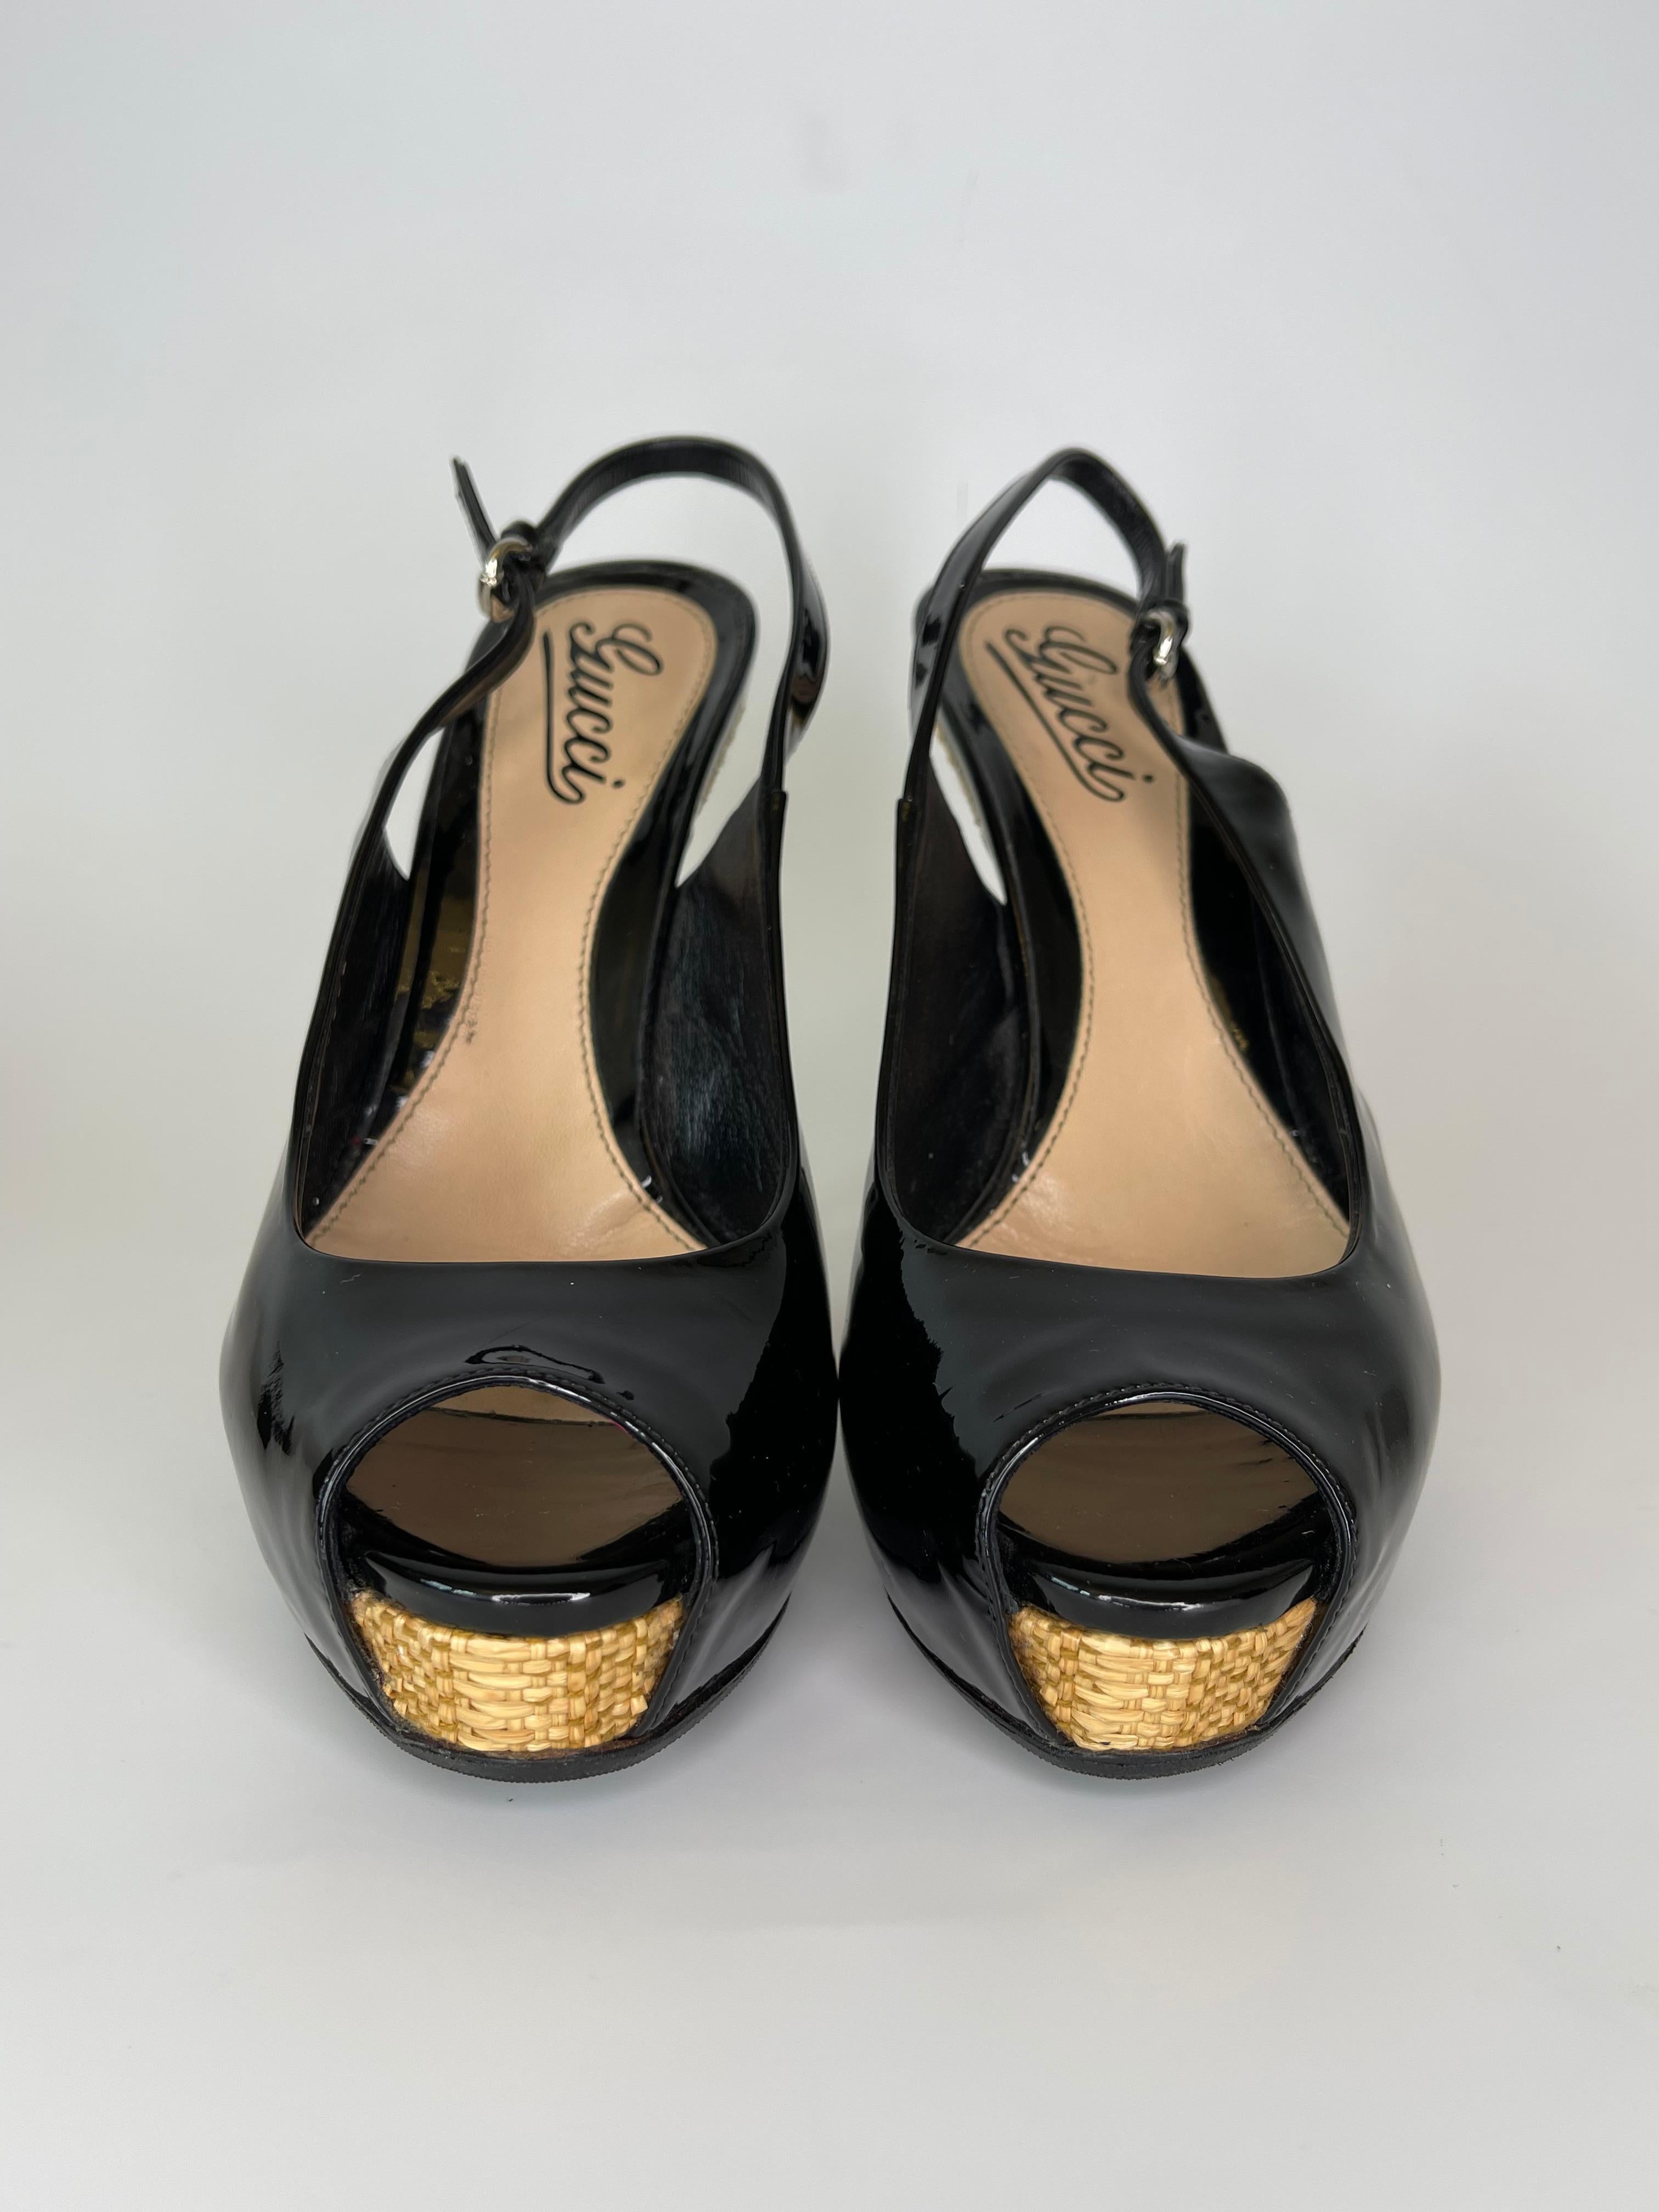 COLOR: Black
MATERIAL: Patent leather
ITEM CODE: 258352
SIZE: 37 EU
HEIGHT: 6